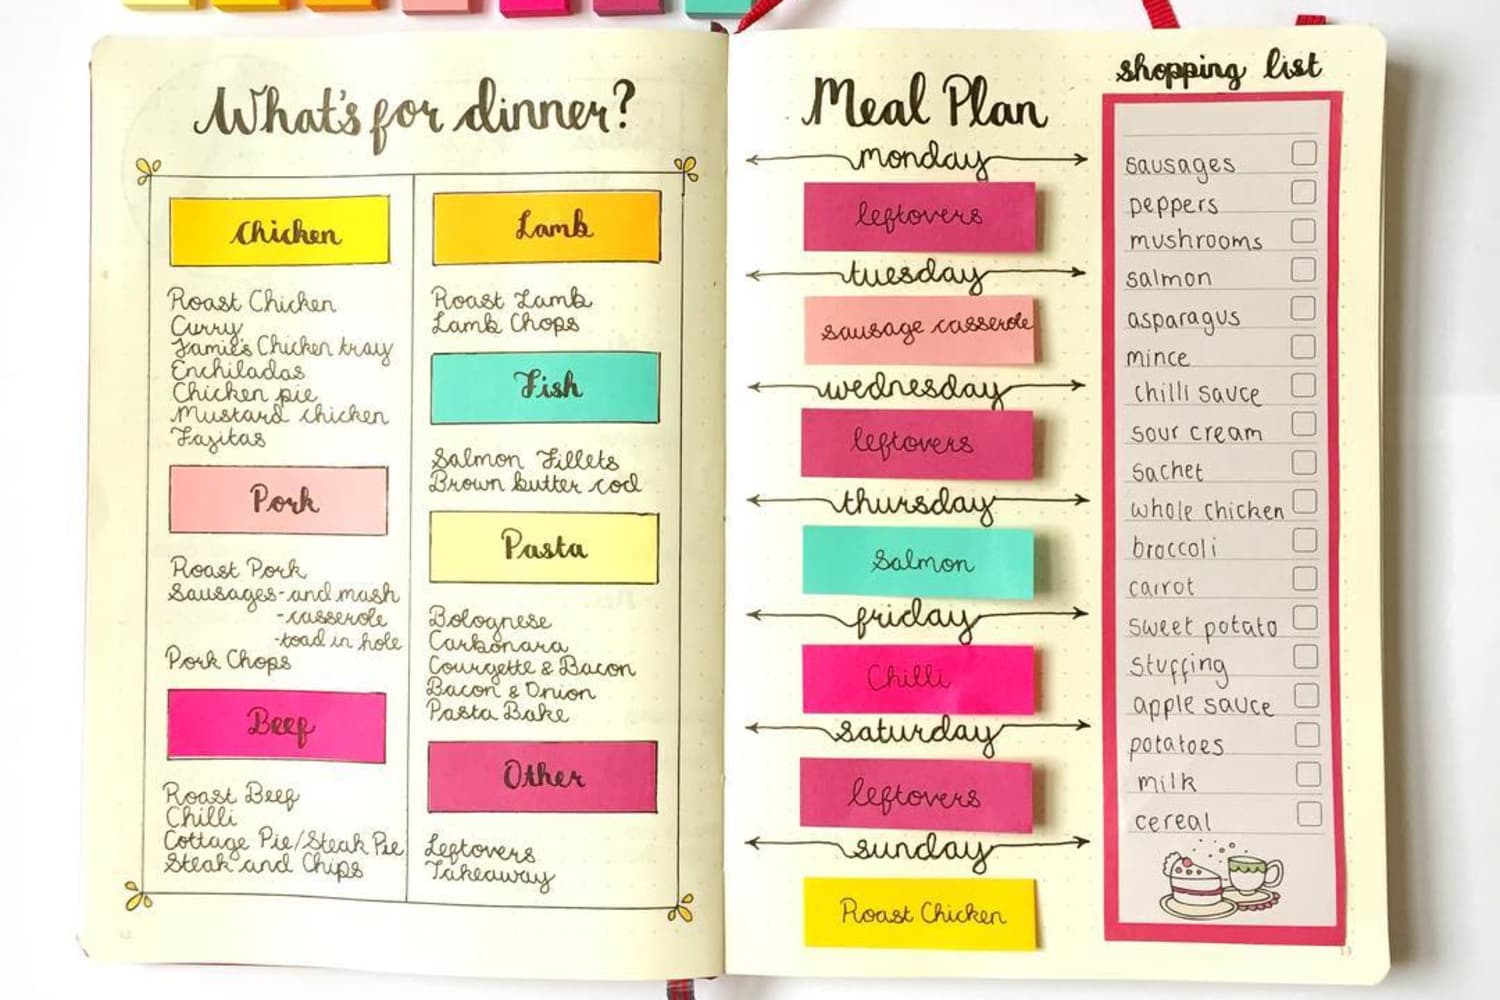 How Do You Use Your Bullet Journal to Meal Plan?